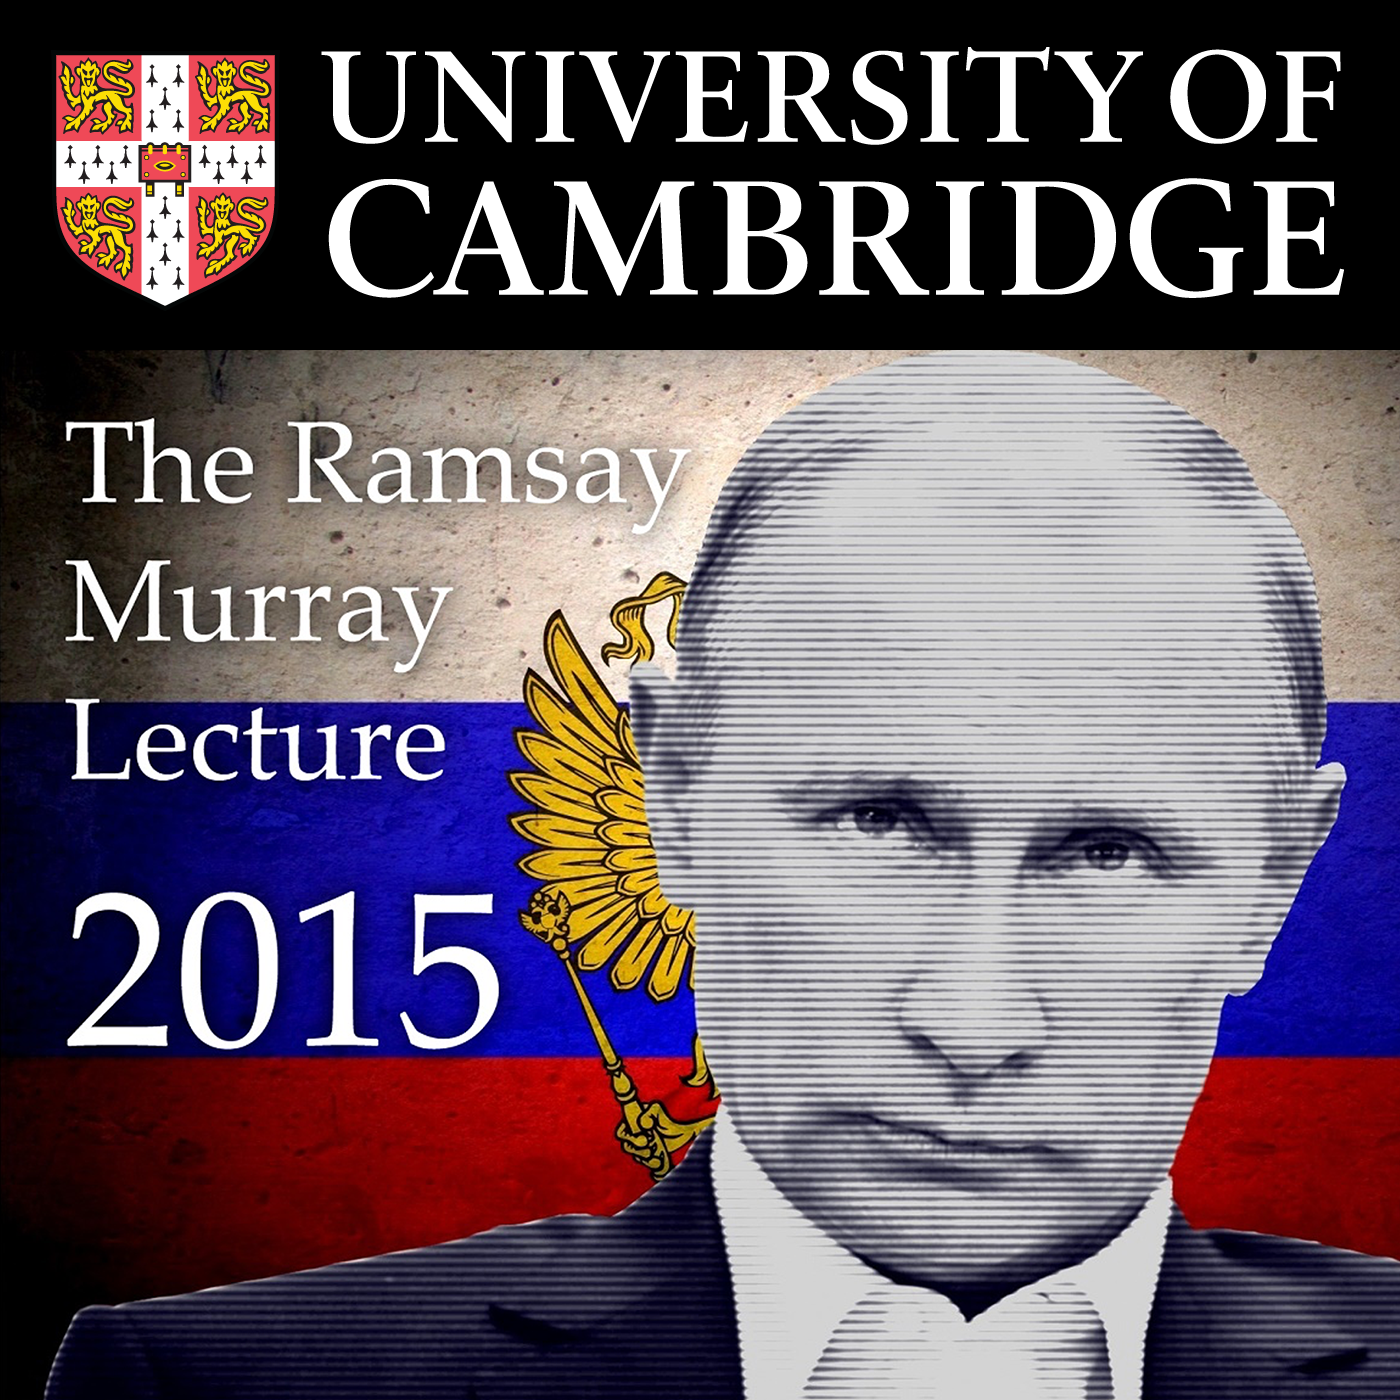 Selwyn College Ramsay Murray Lecture 2015 (Bridget Kendall - BBC Diplomatic Correspondent - 'Putin, Russia and the West')'s image